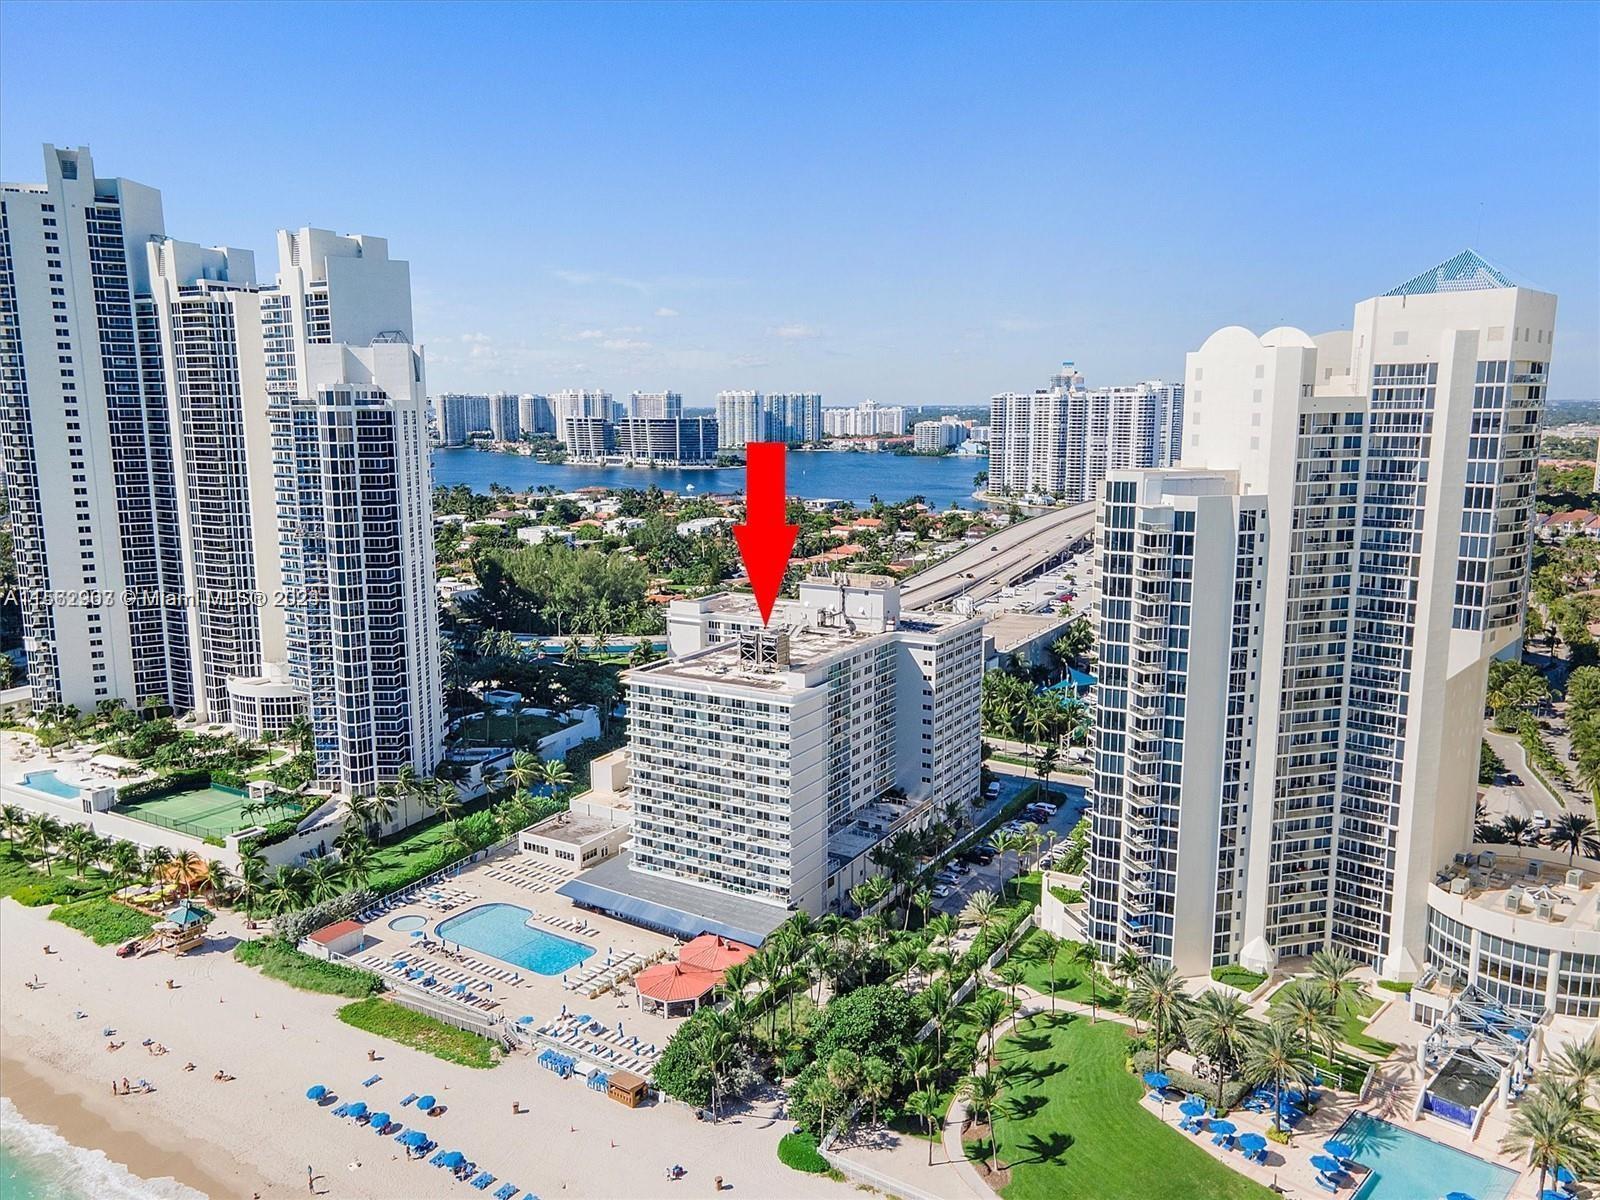 Photo of 19201 Collins Ave #728 in Sunny Isles Beach, FL